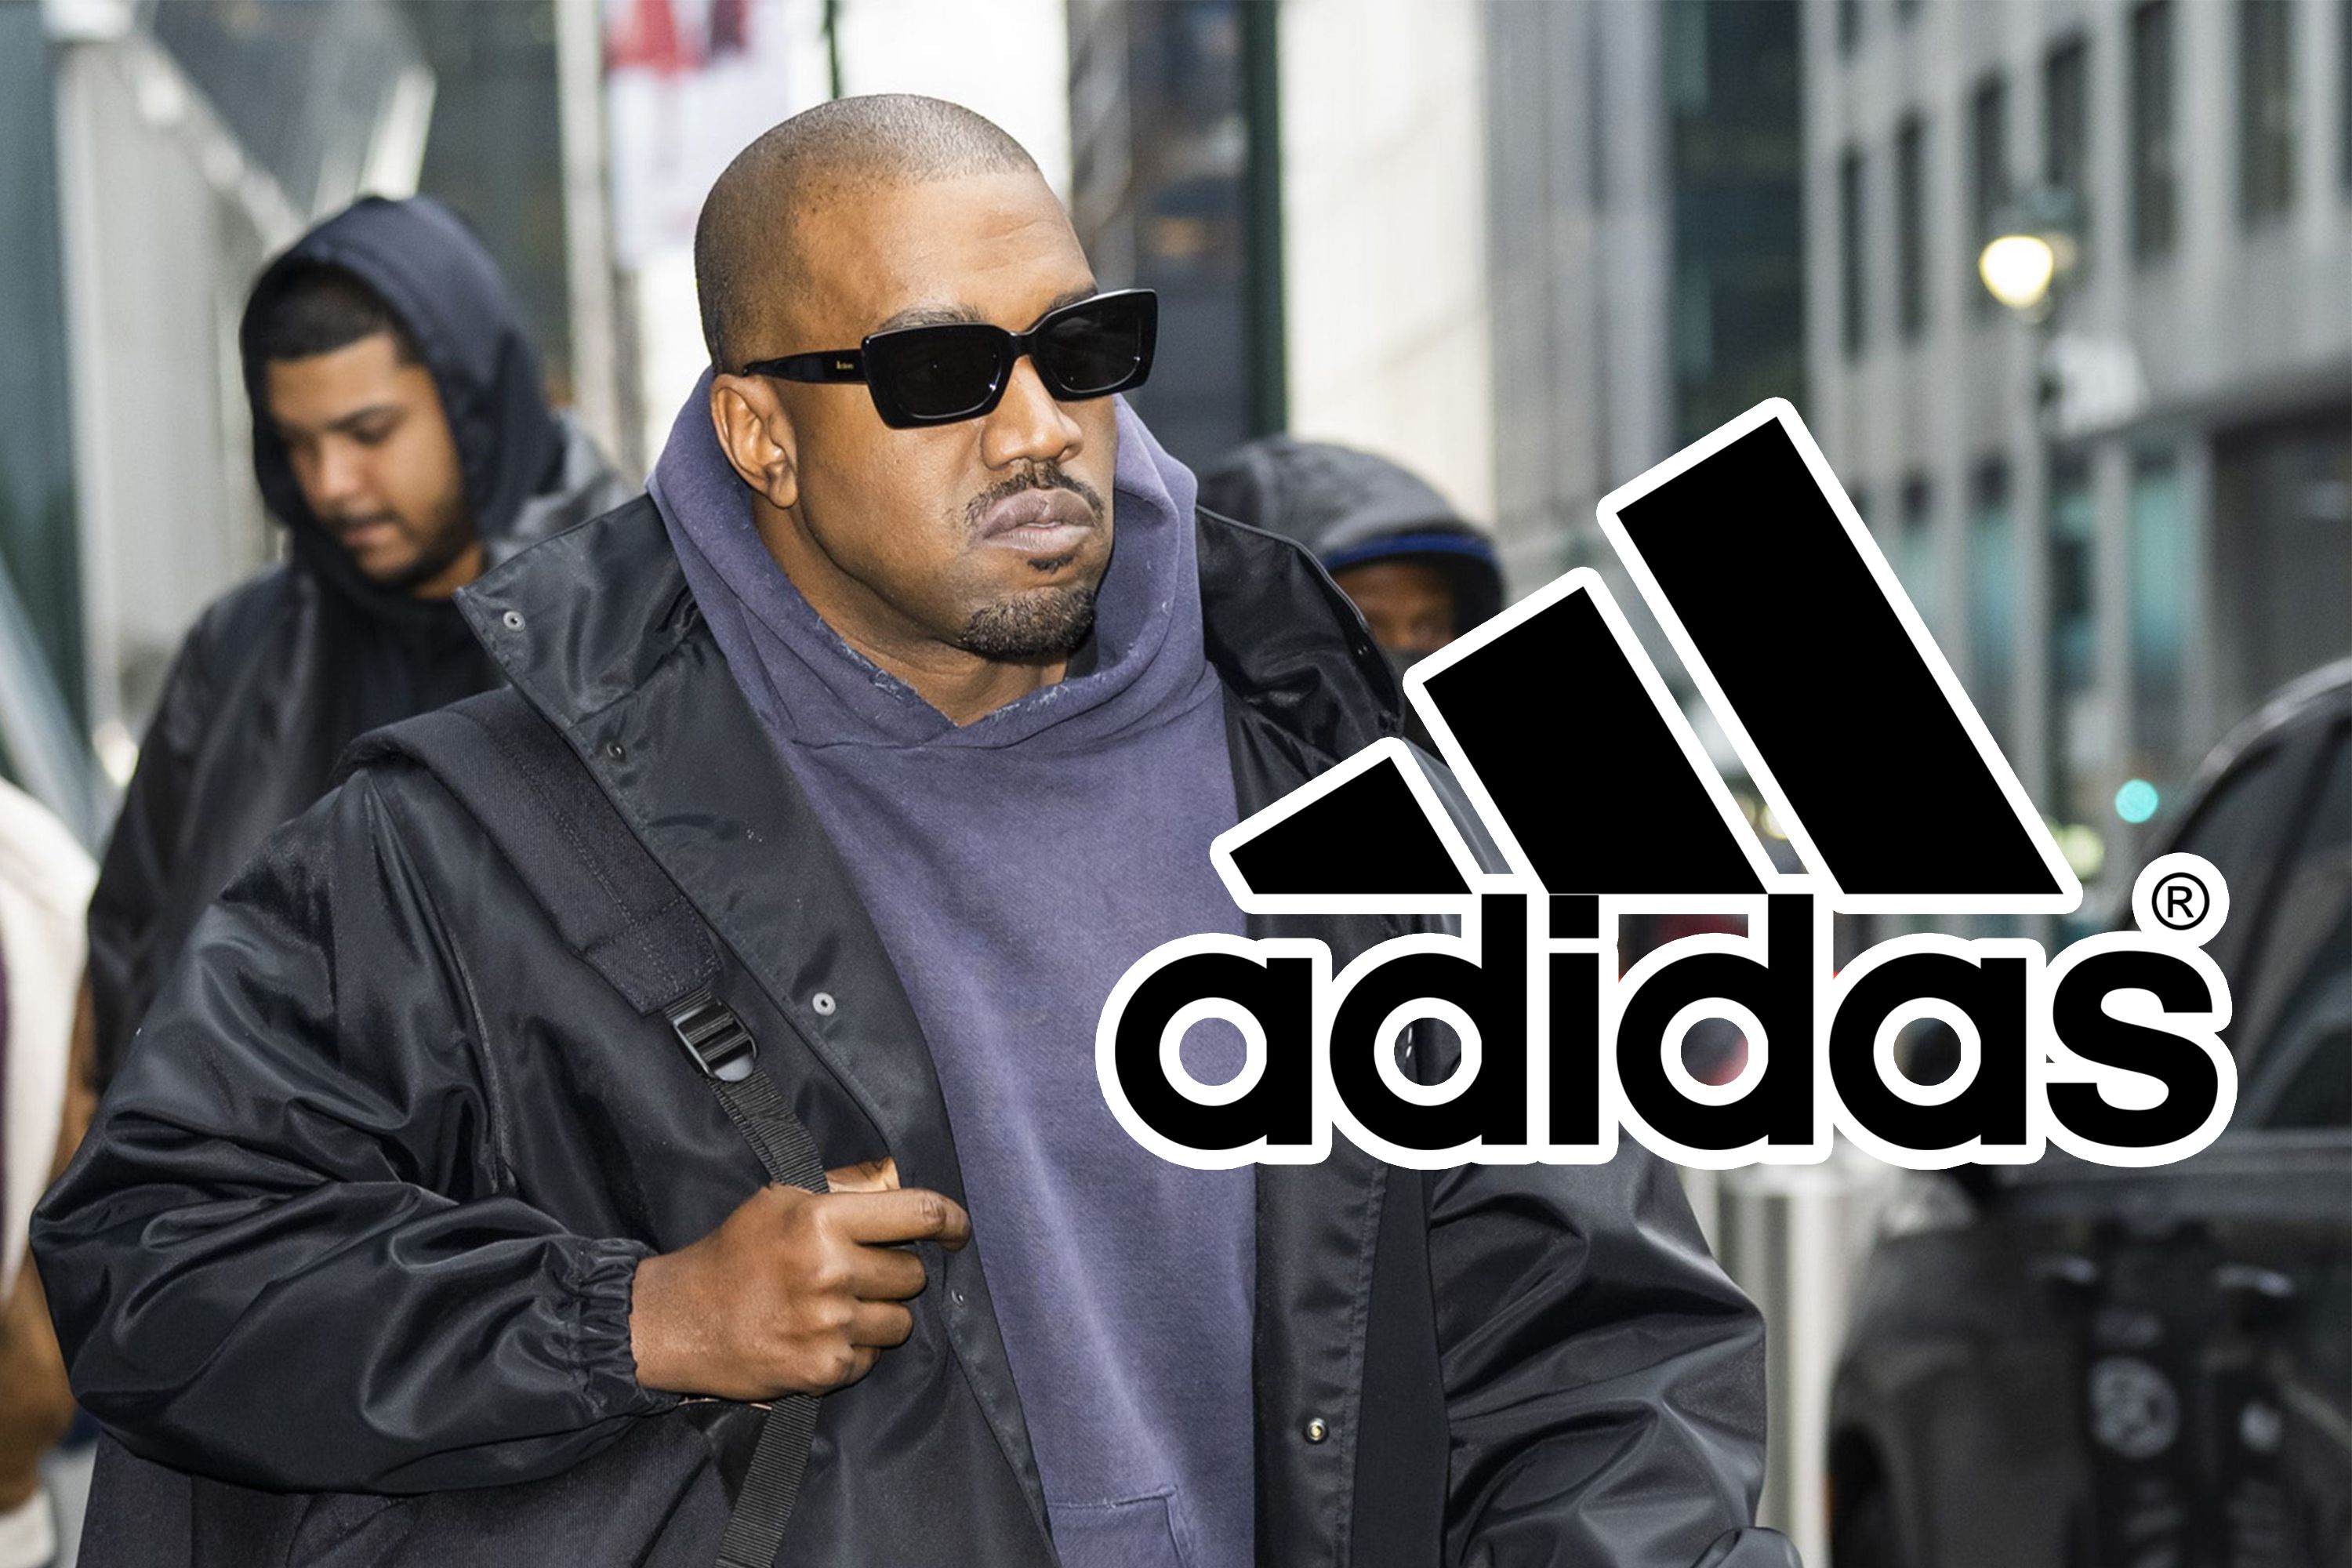 Adidas to sell second batch of Yeezy trainers after breakup with Kanye West, Business